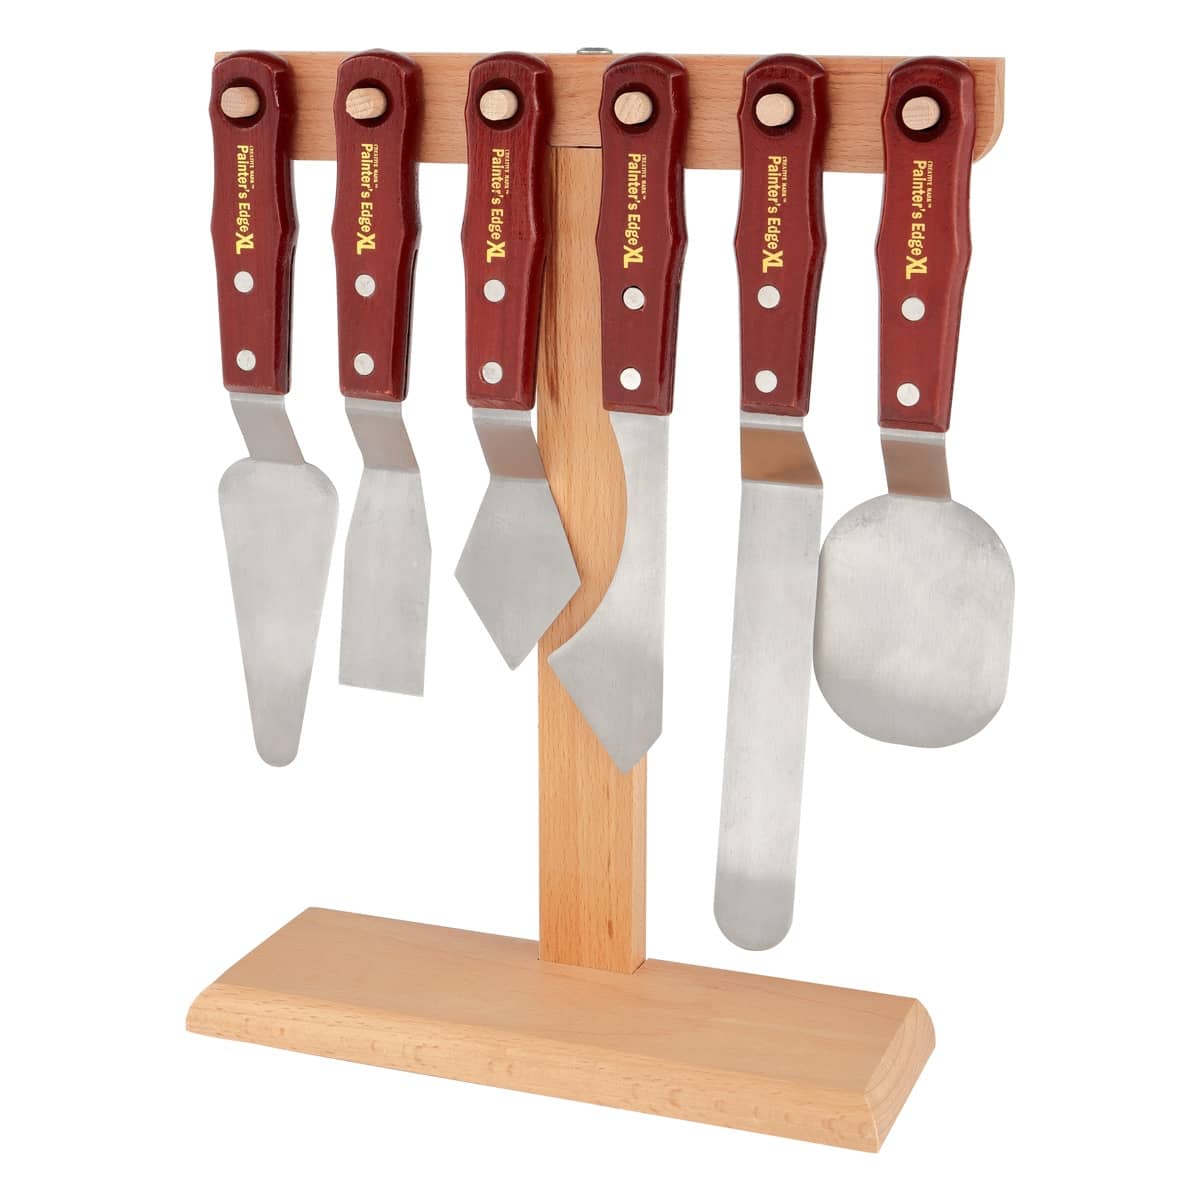 Painter's Edge XL Palette Knife And Stand Set